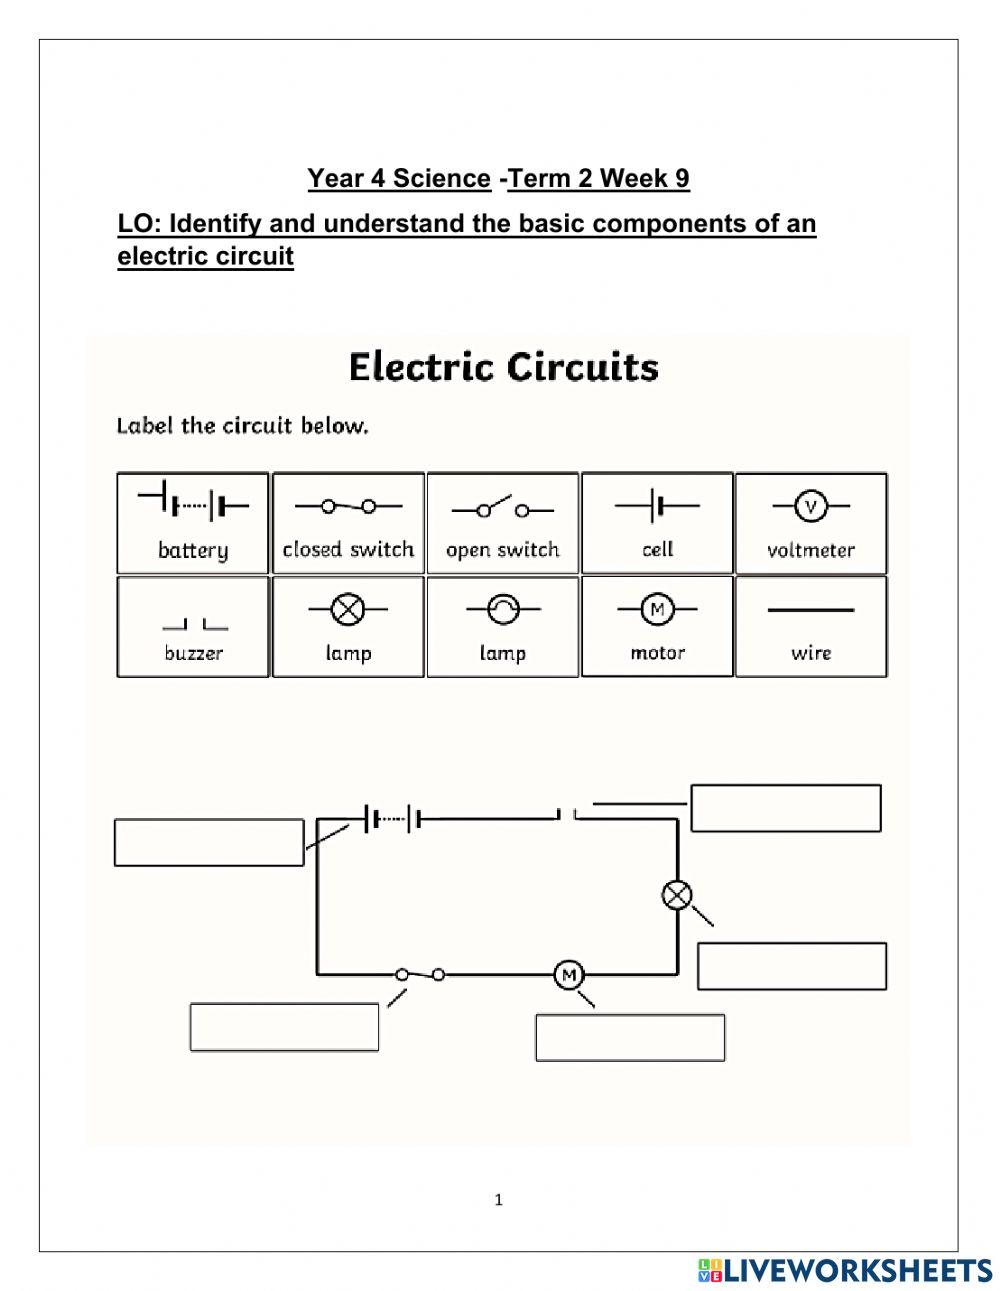 Components of a electric circuit